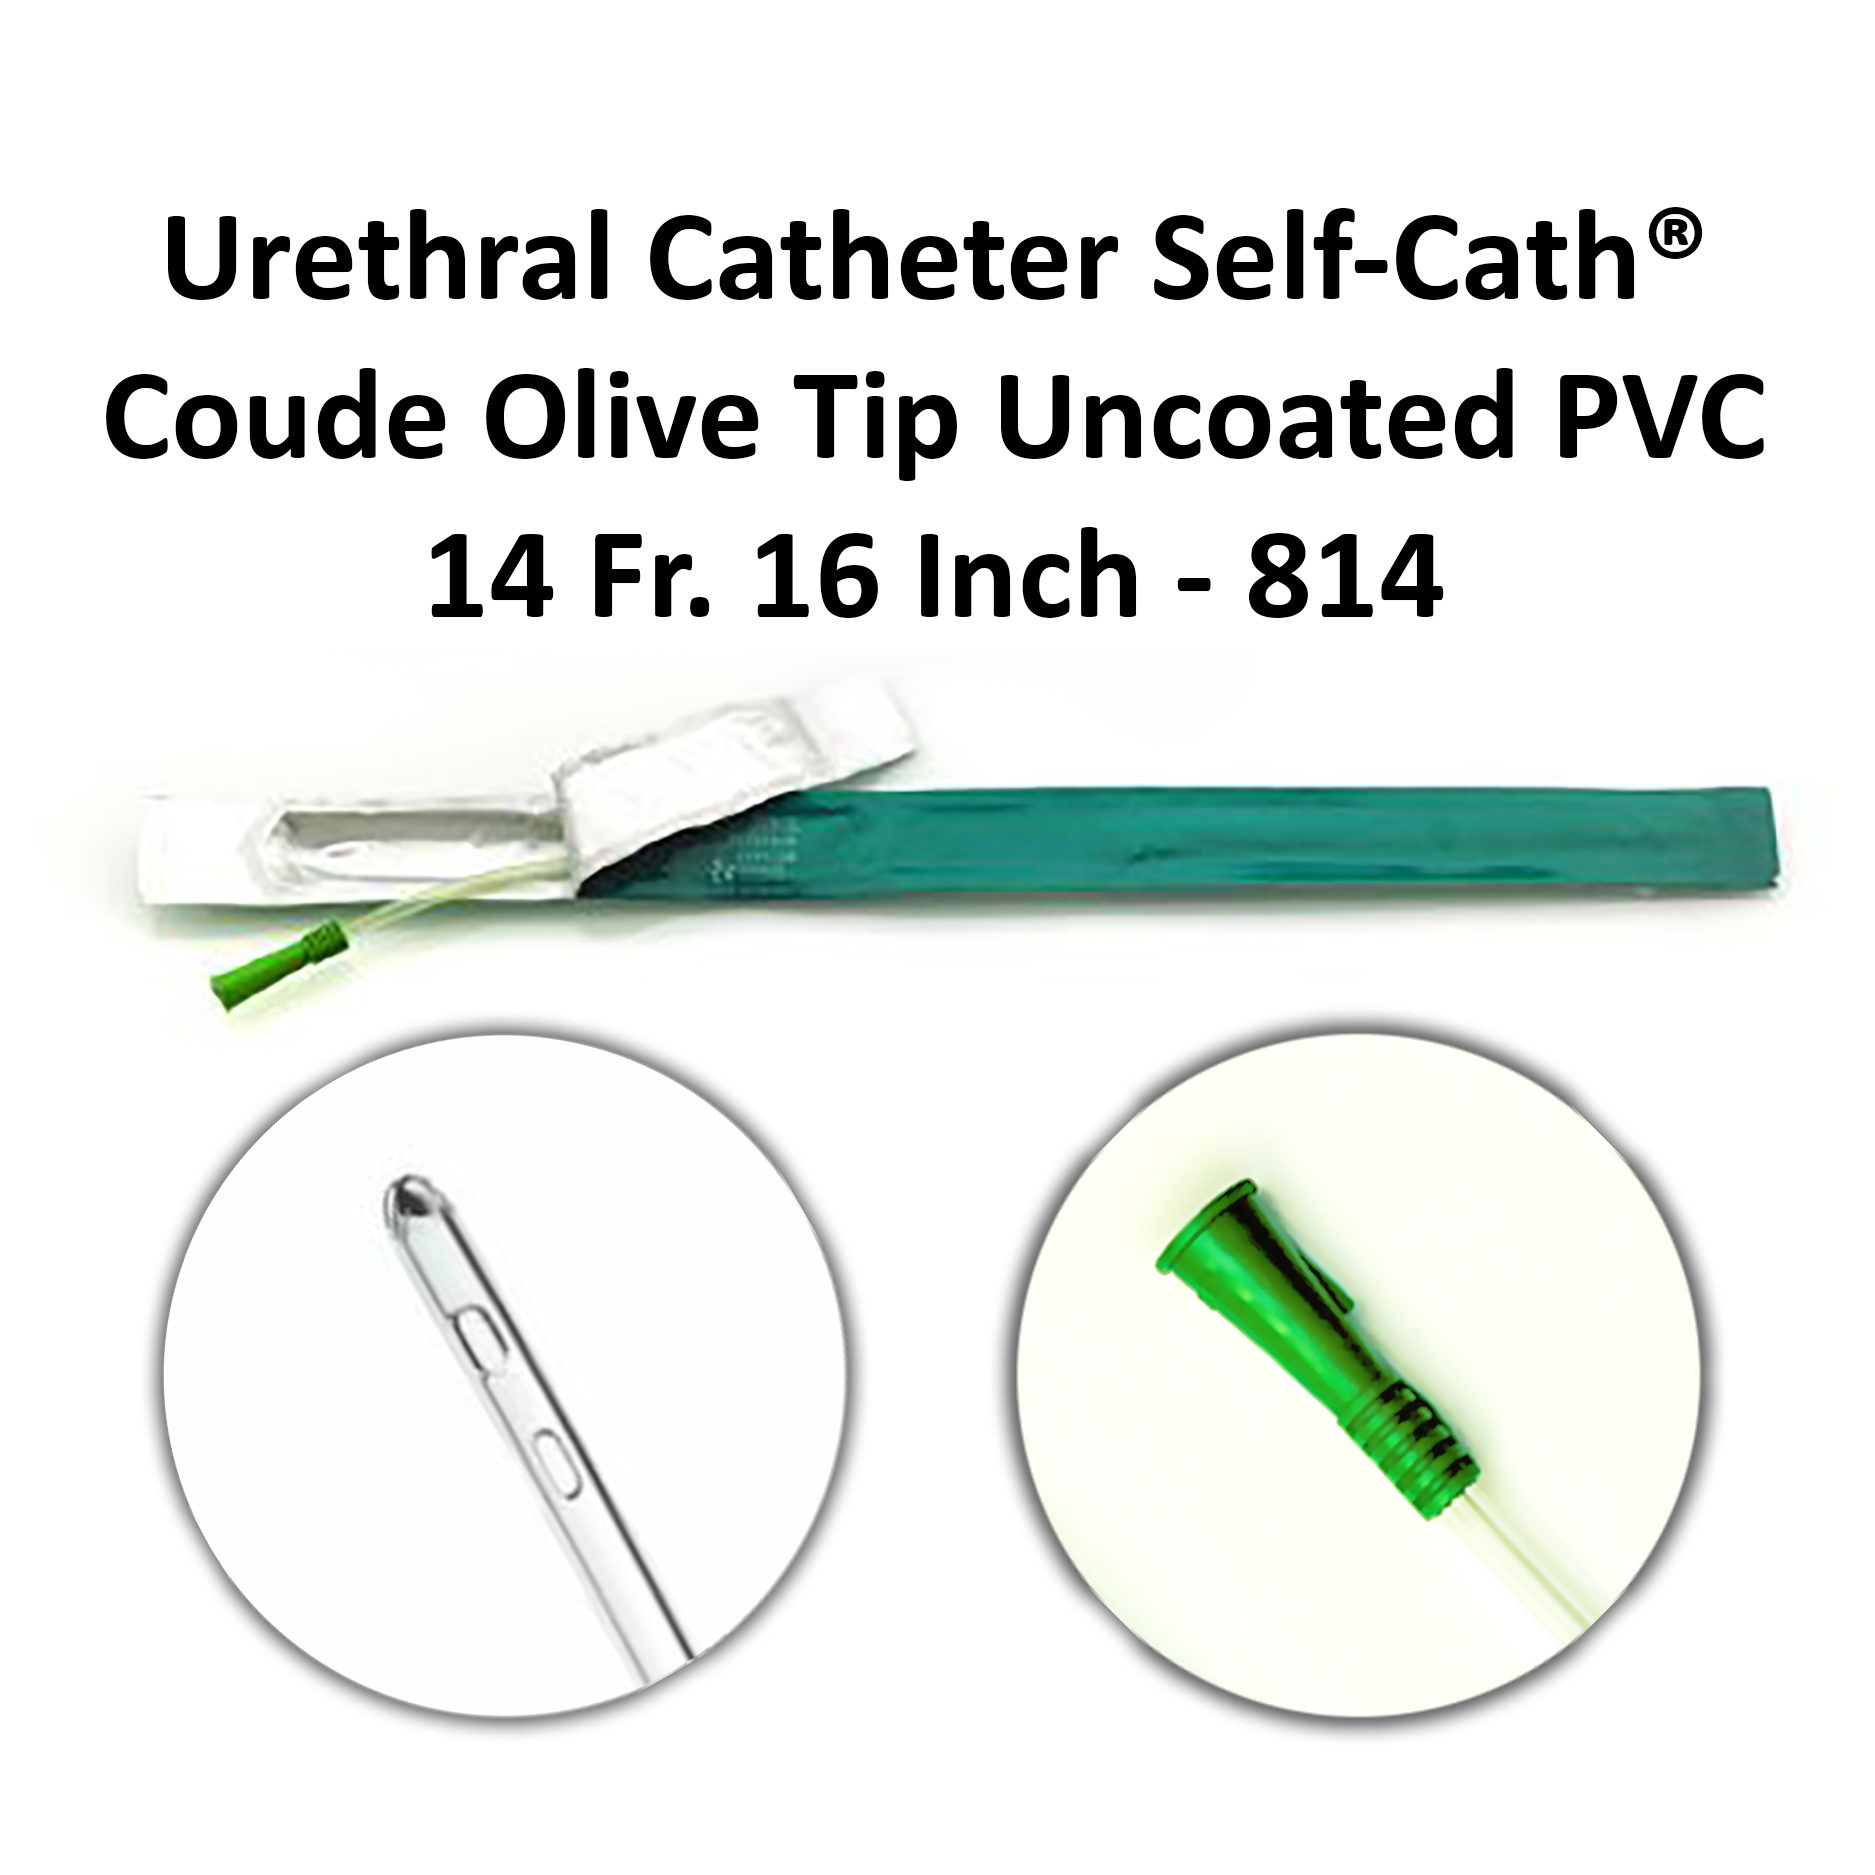 Urethral Catheter Self-Cath® Coude Olive Tip Uncoated PVC 14 Fr. 16 Inch - 814